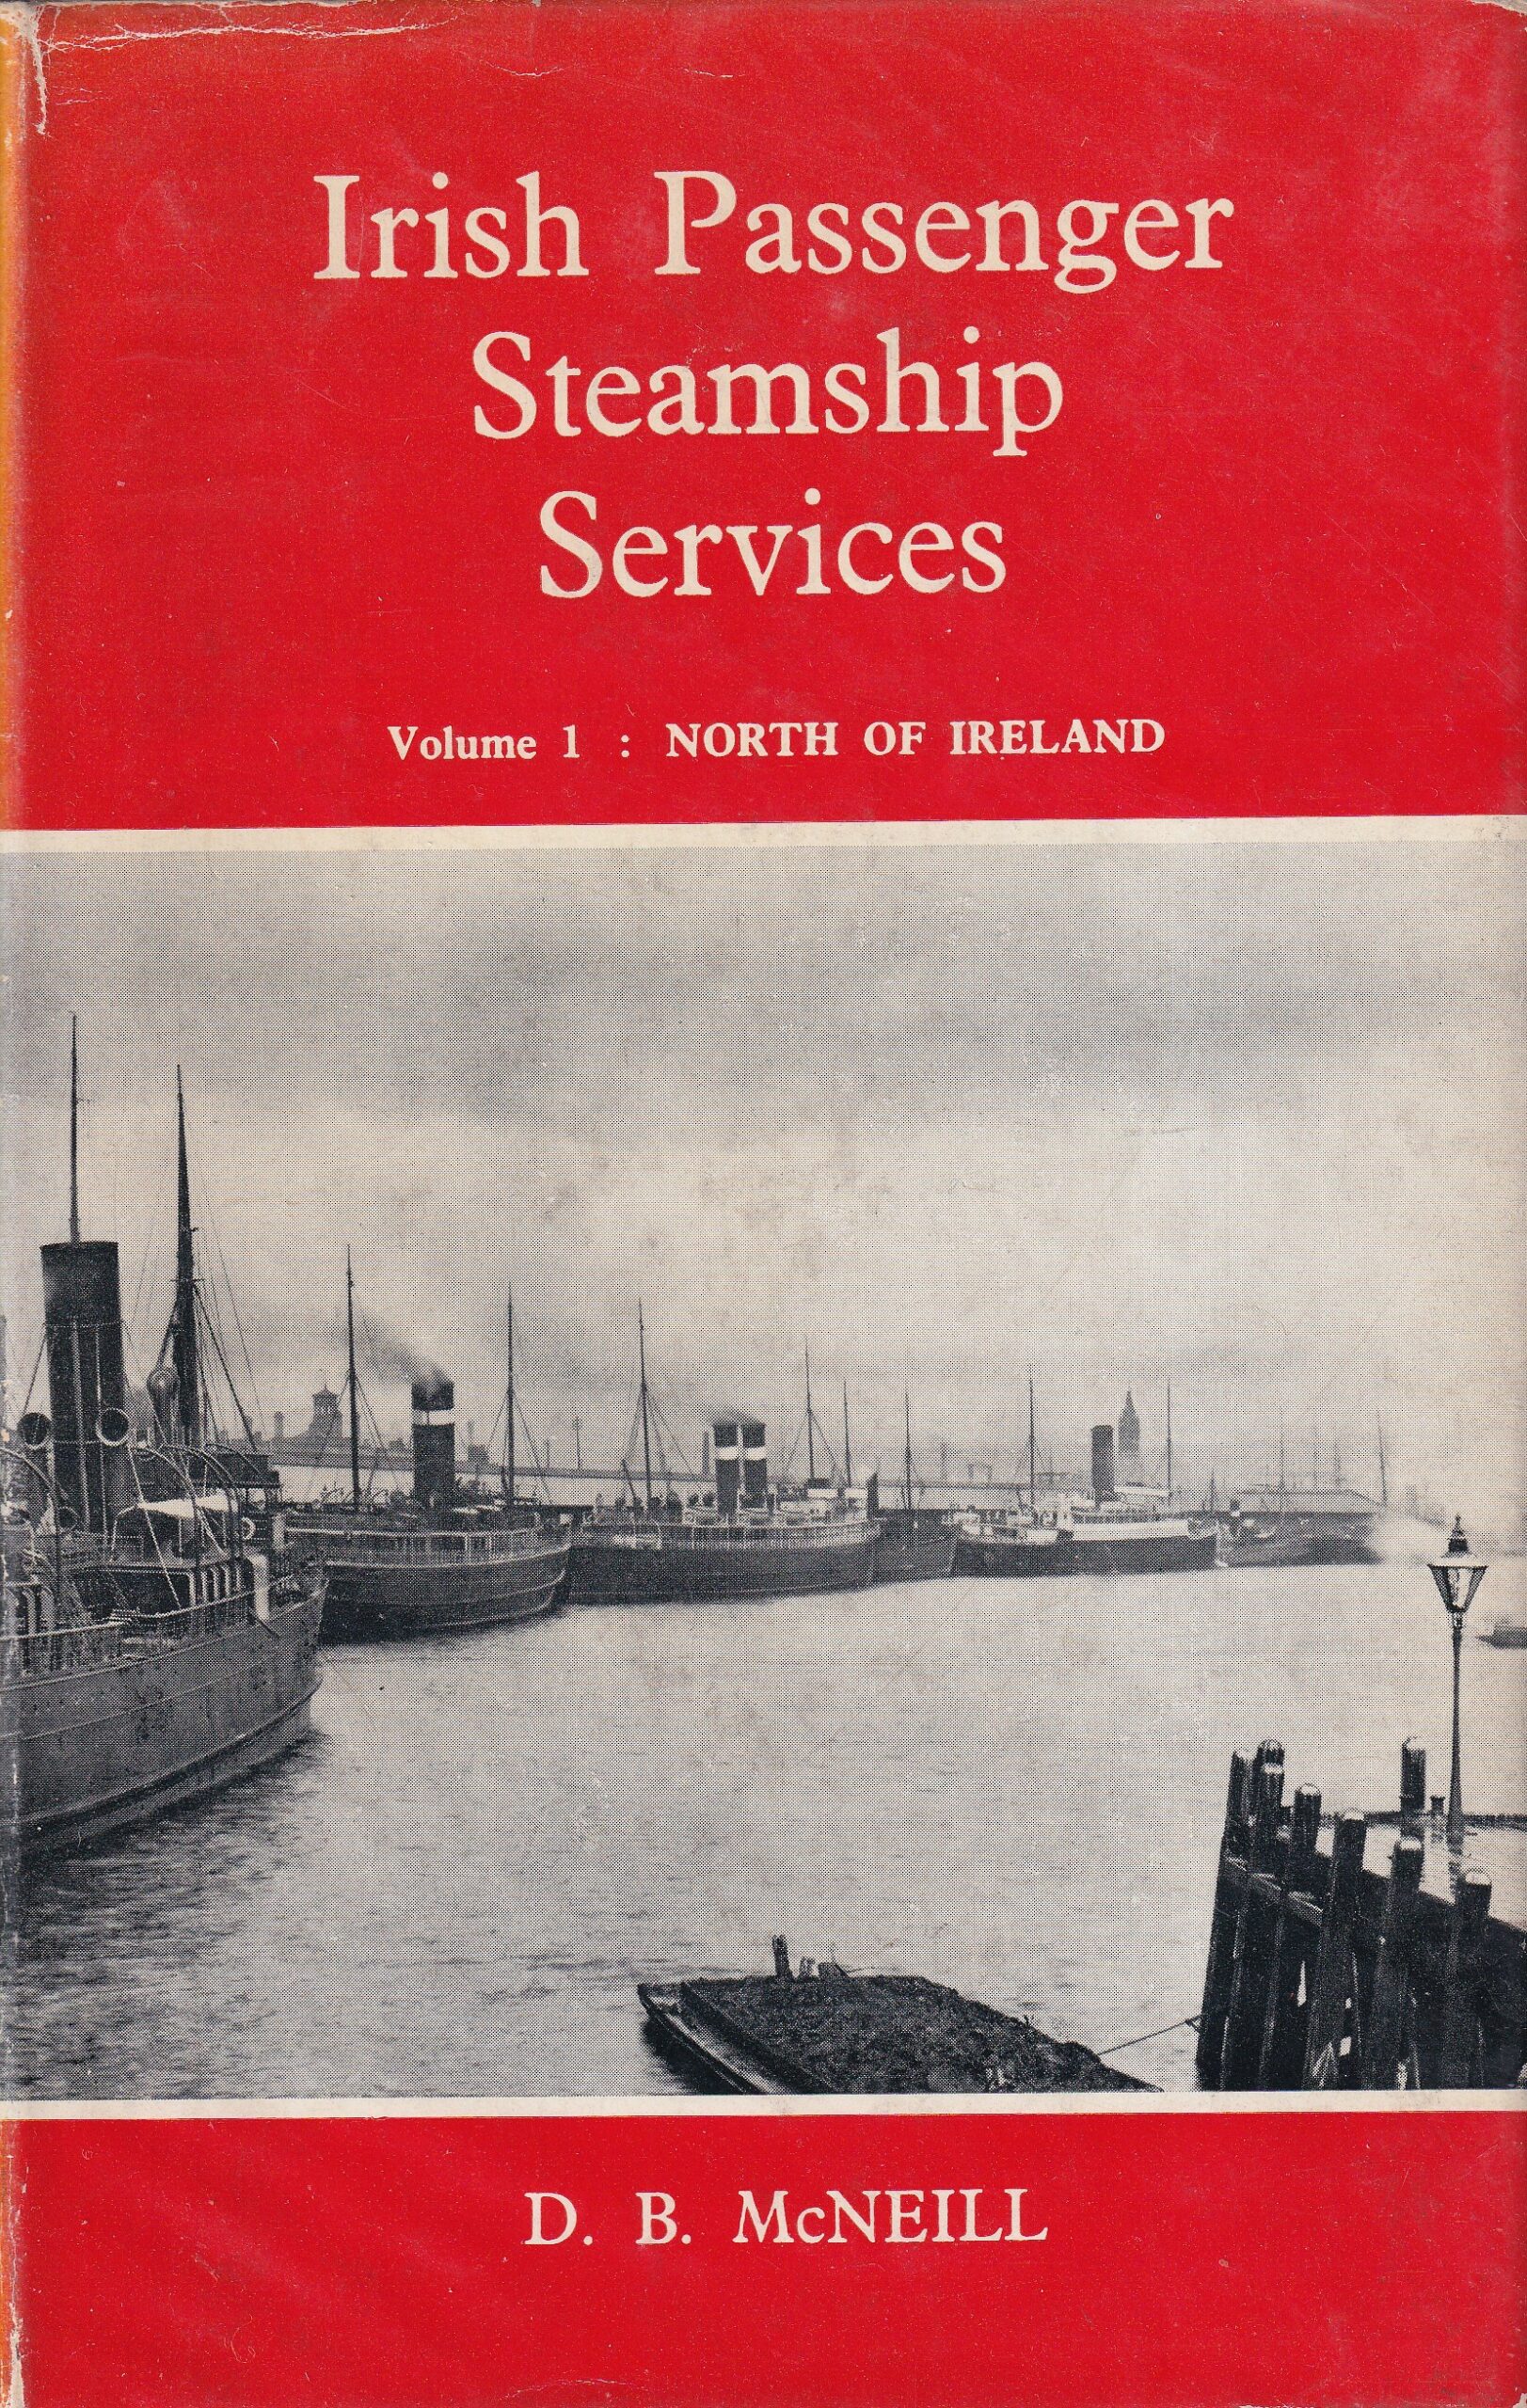 Irish Passenger Steamship Services (Volume One: North of Ireland and Volume Two: South of Ireland) by D.B. McNeill